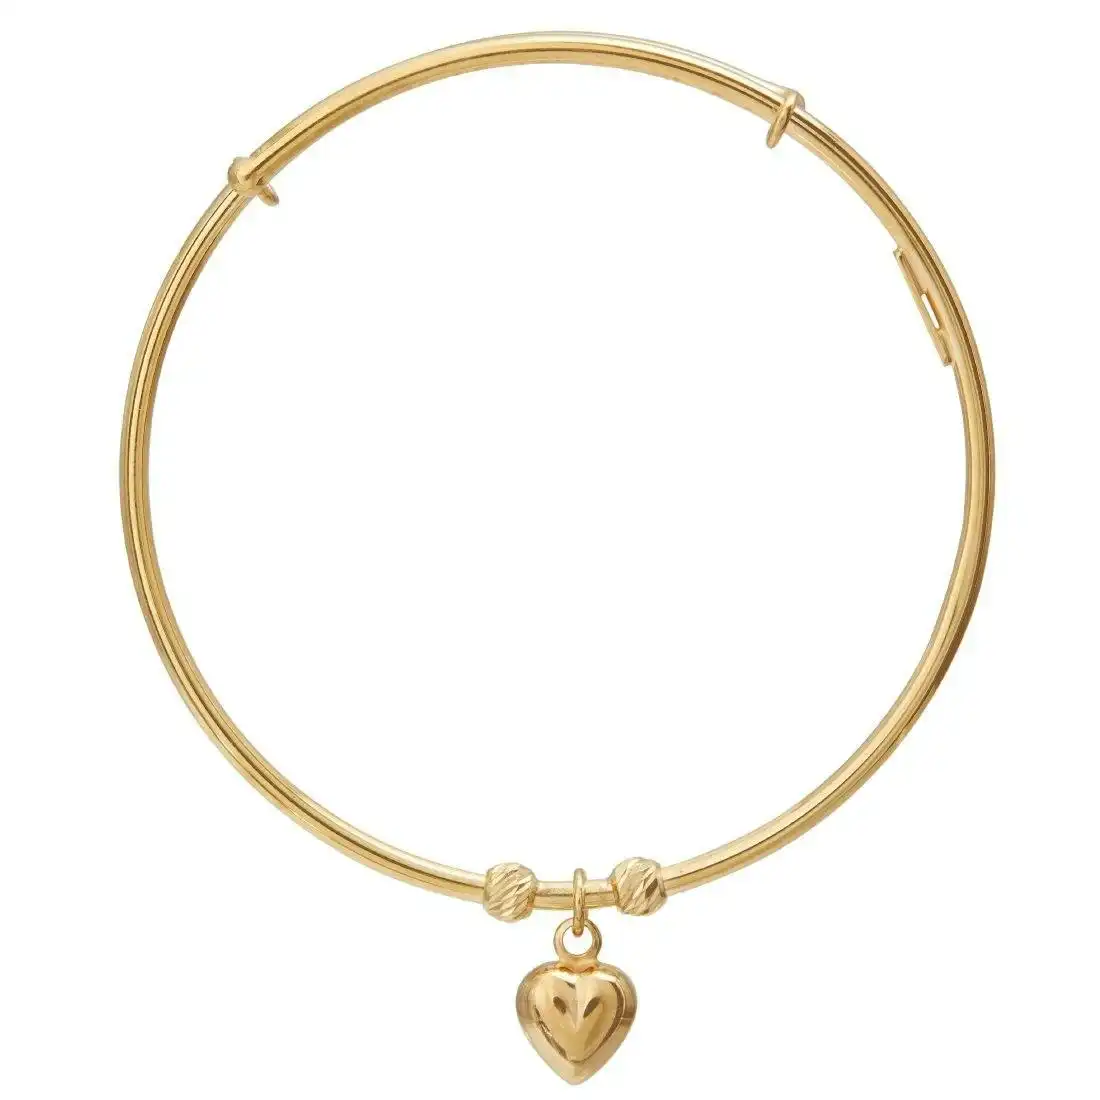 Children's Adjustable Heart Bangle in 9ct Yellow Gold Silver Infused